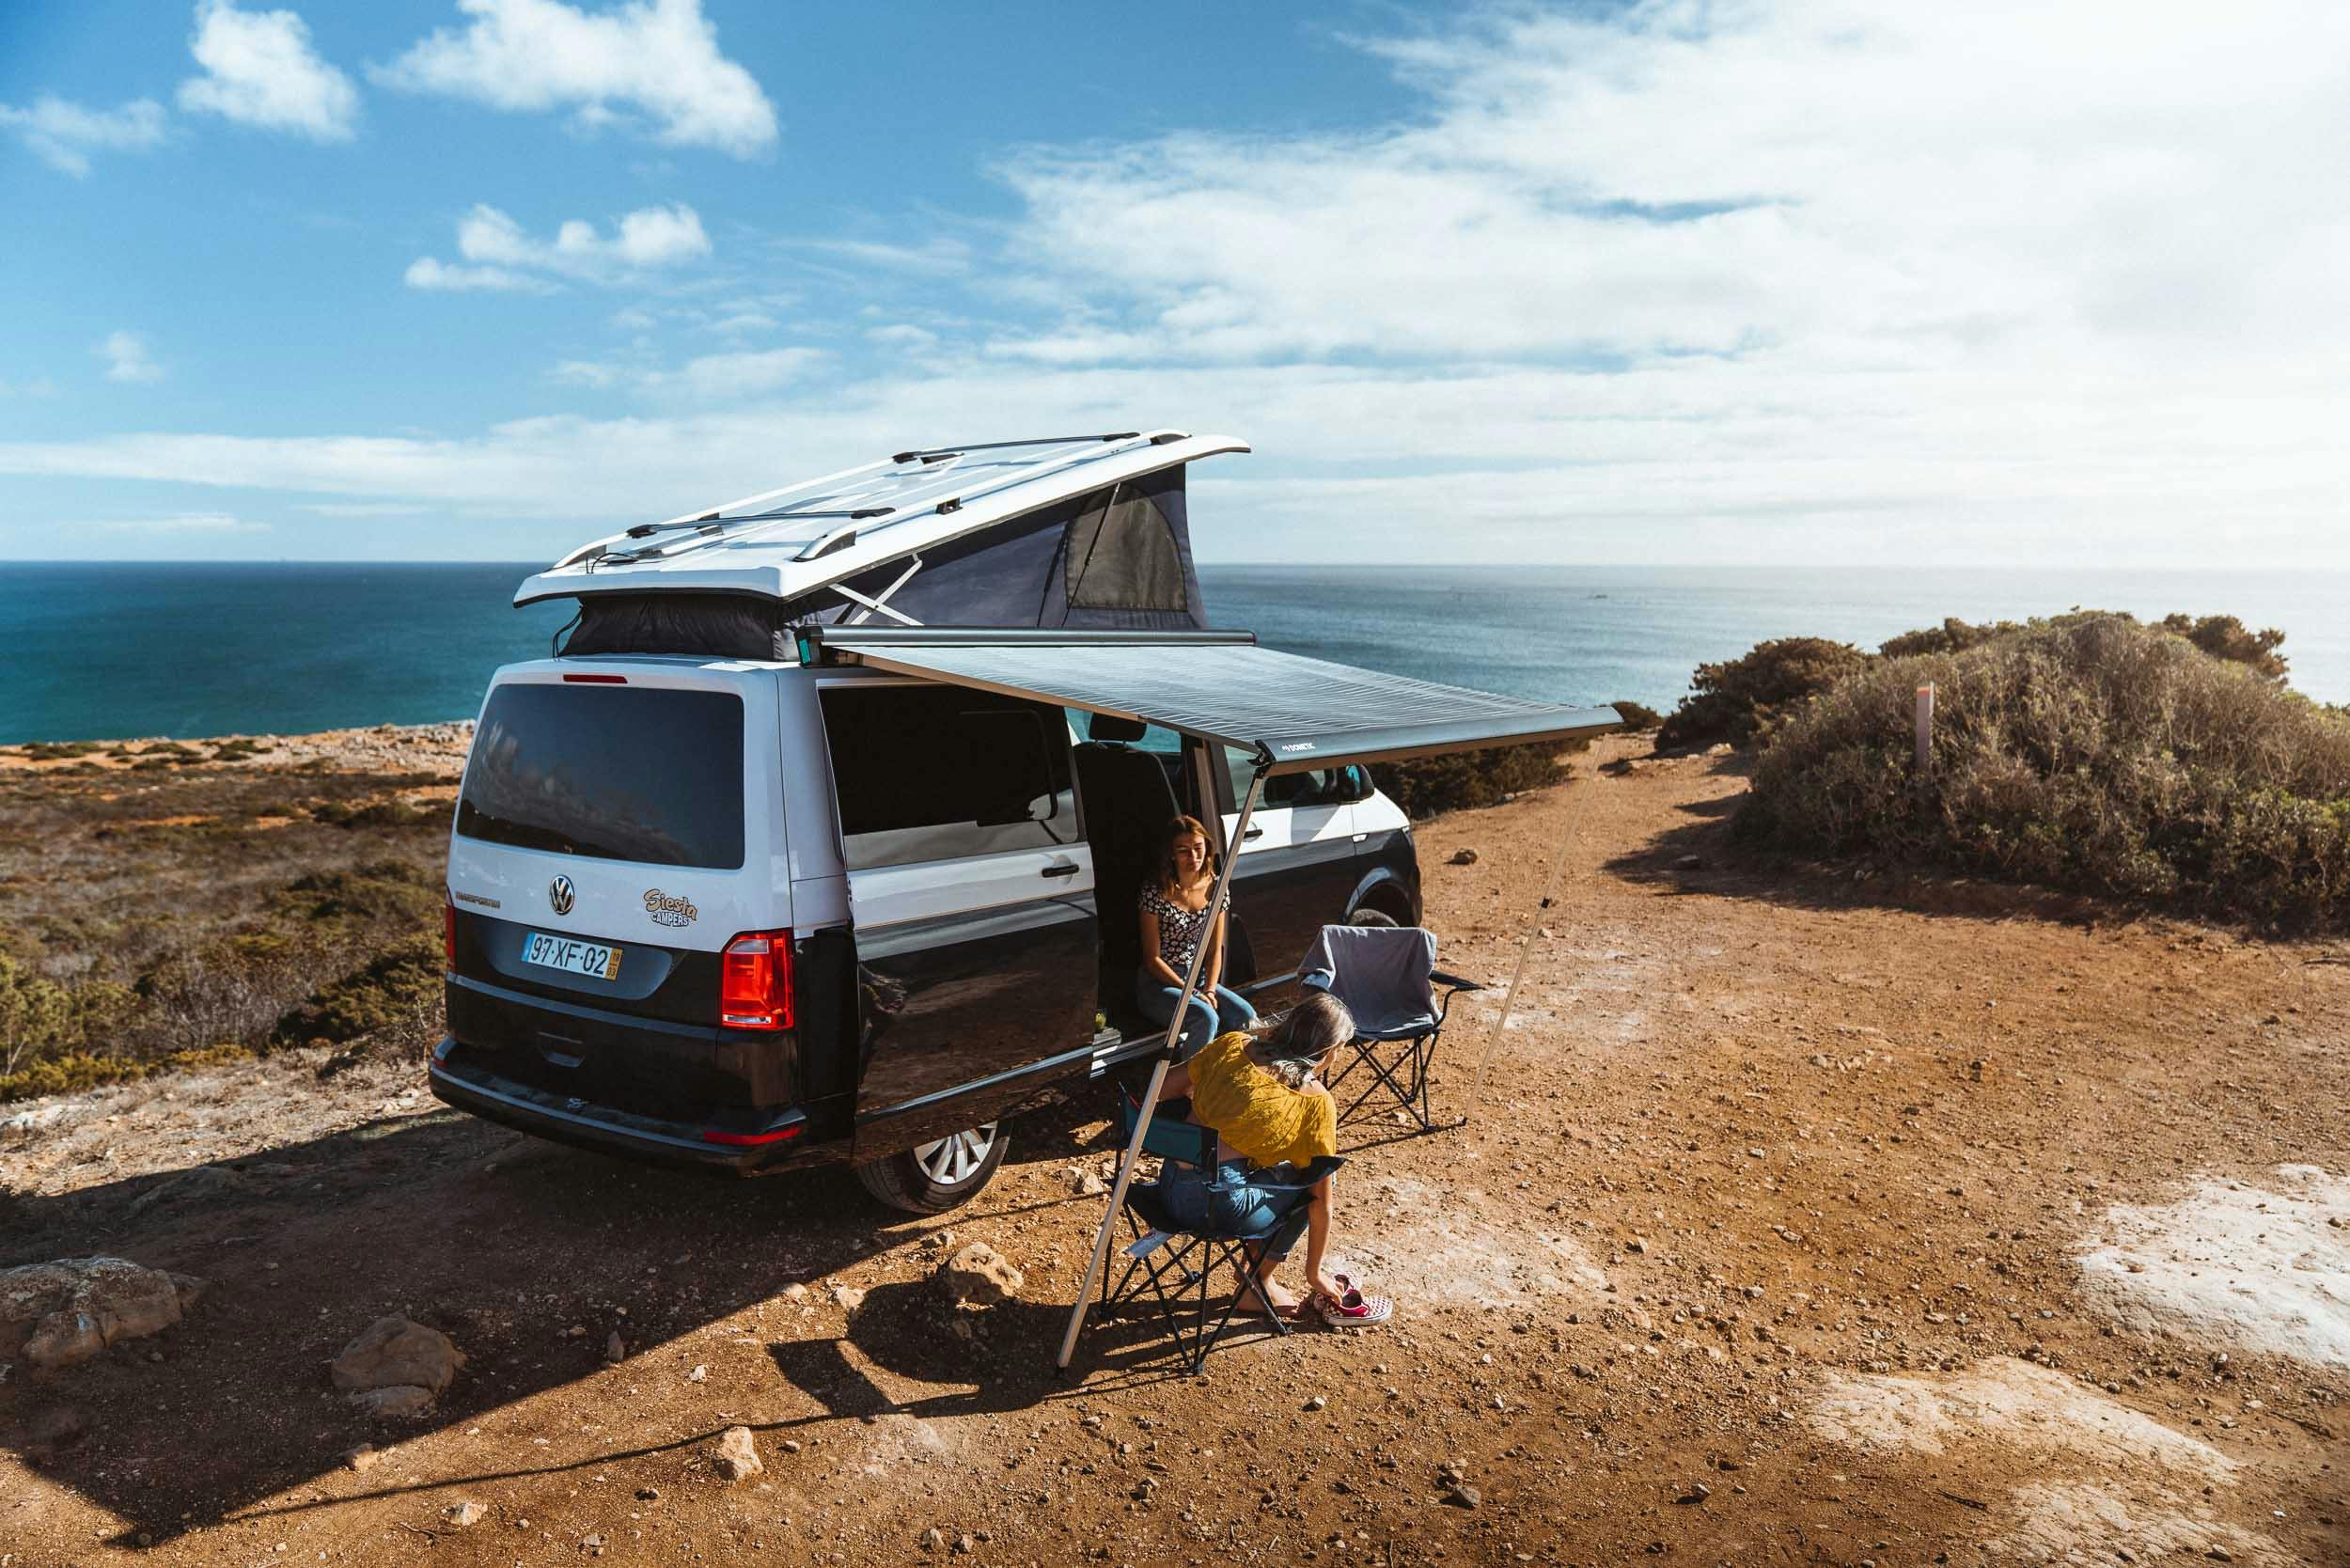 Sunshade is essential for any sunny family camping trip.